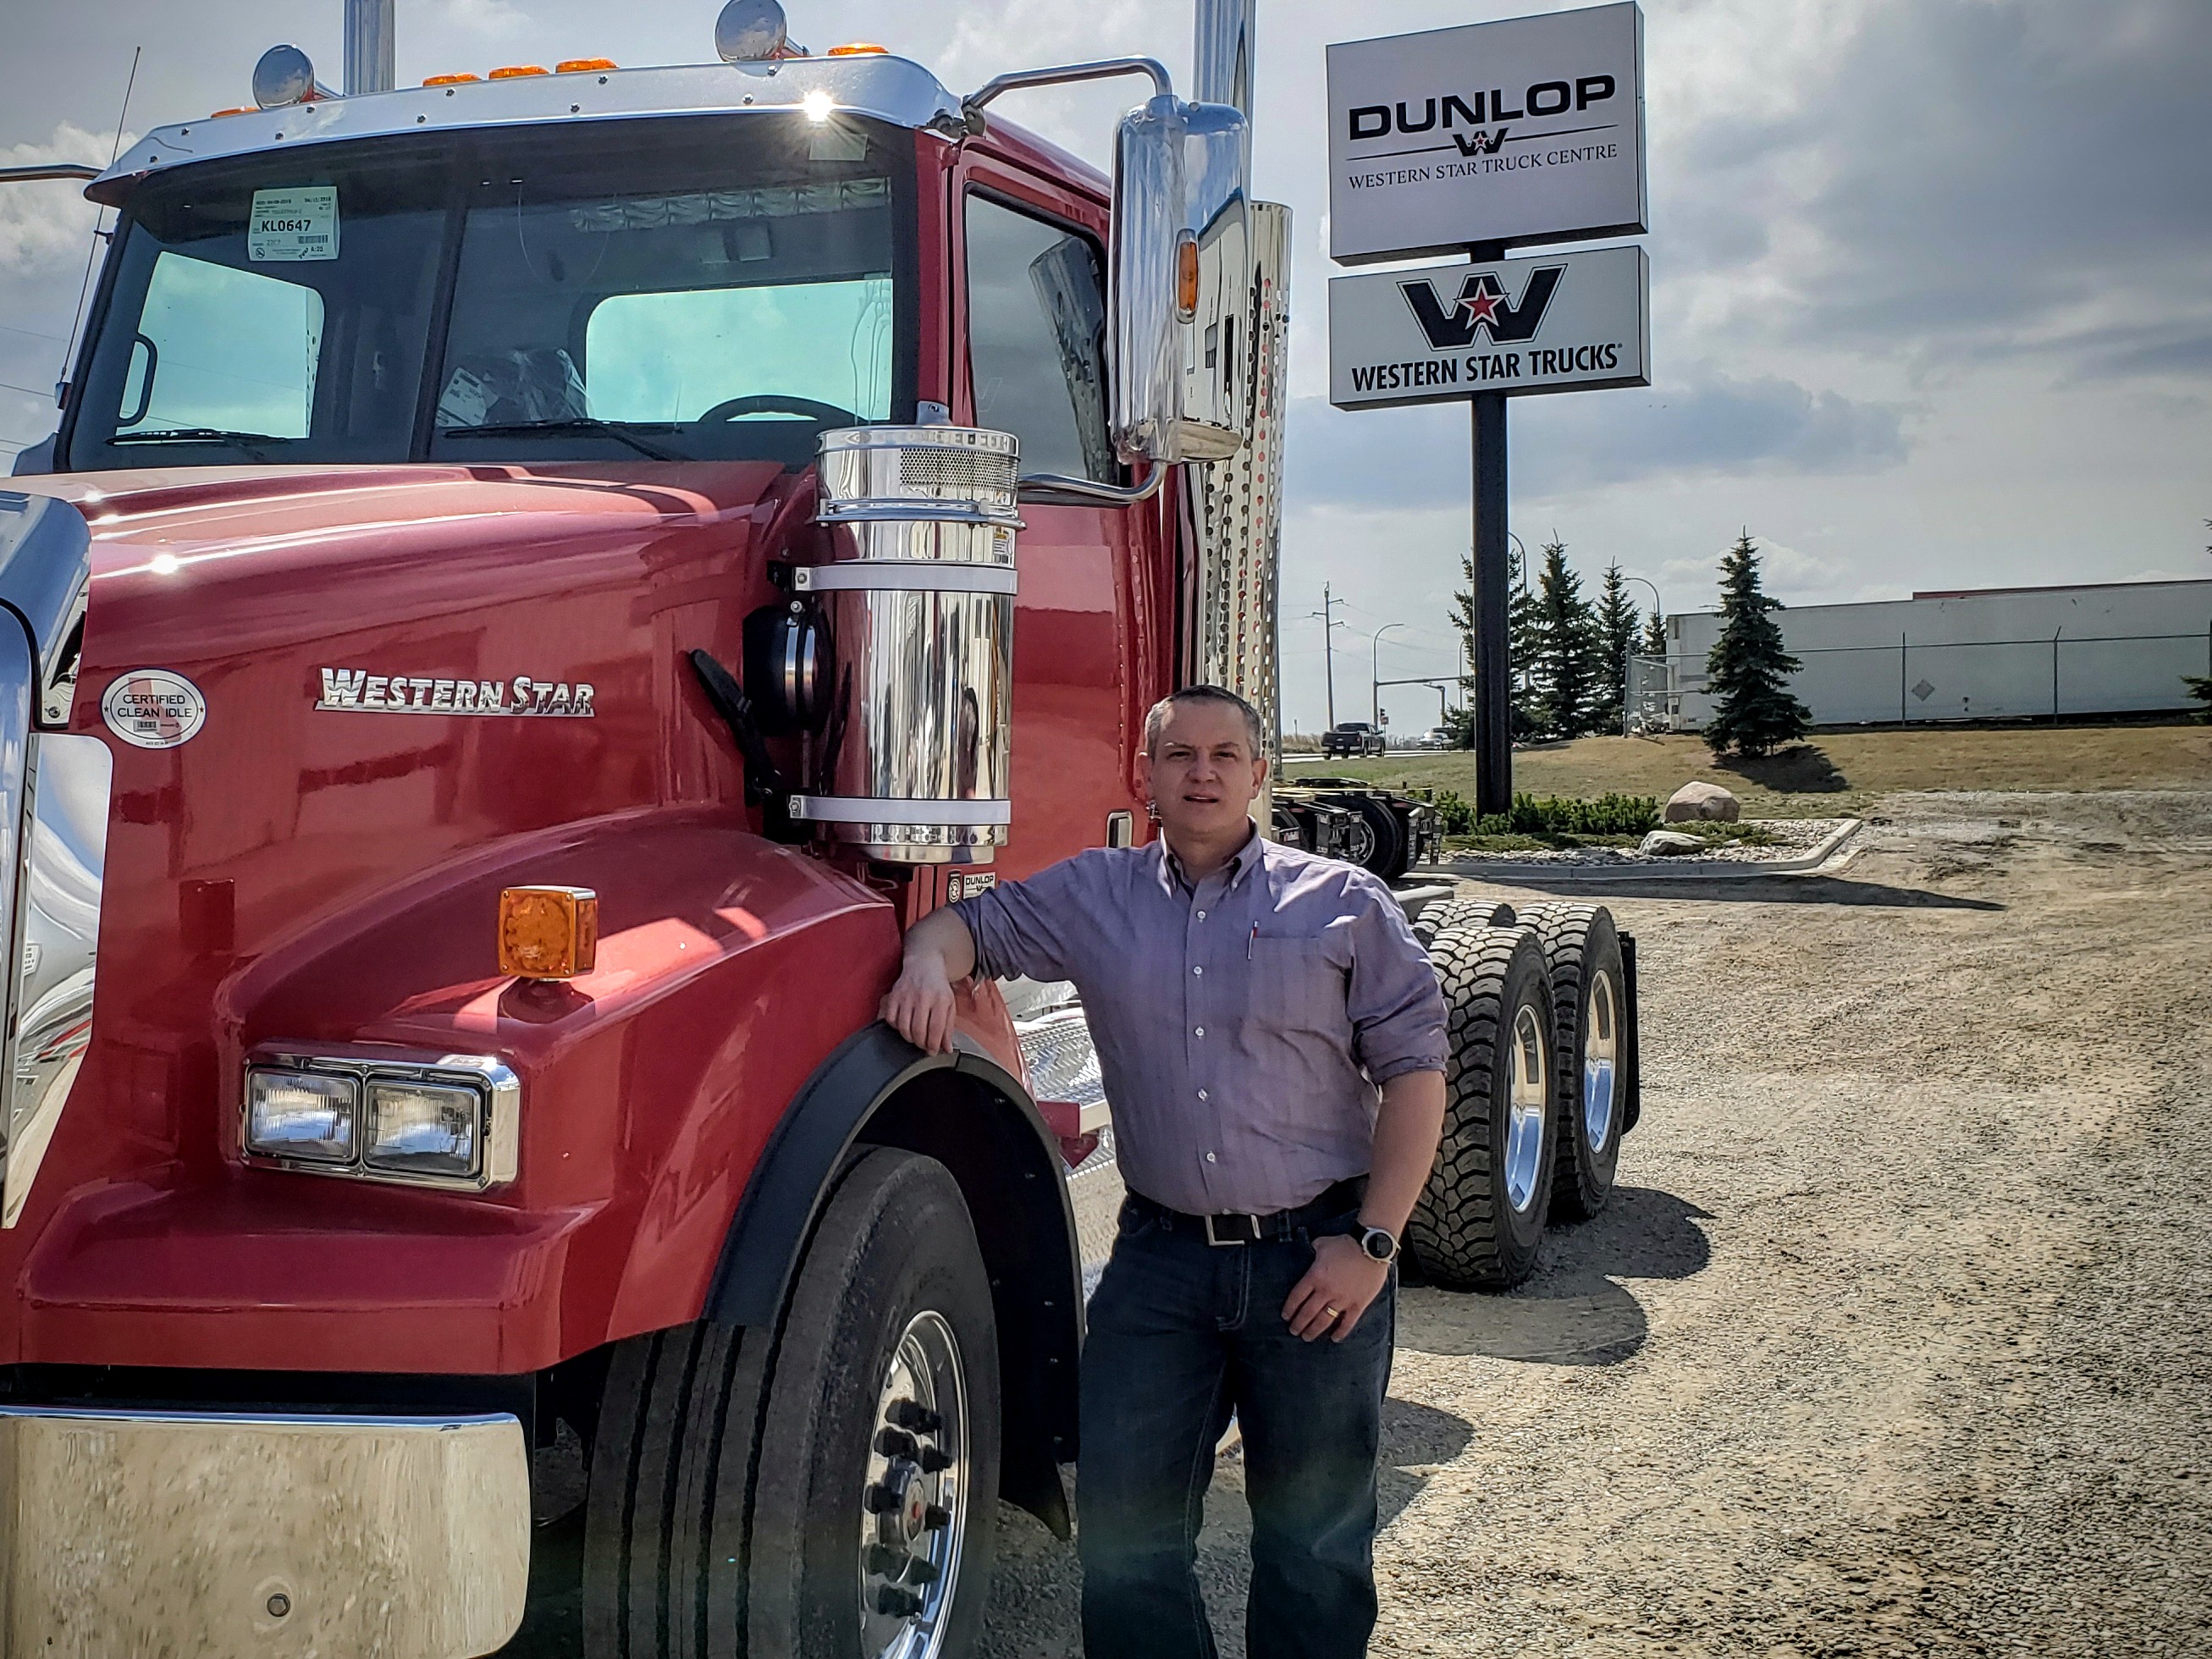 Chris Thom standing next to a Western Star truck.